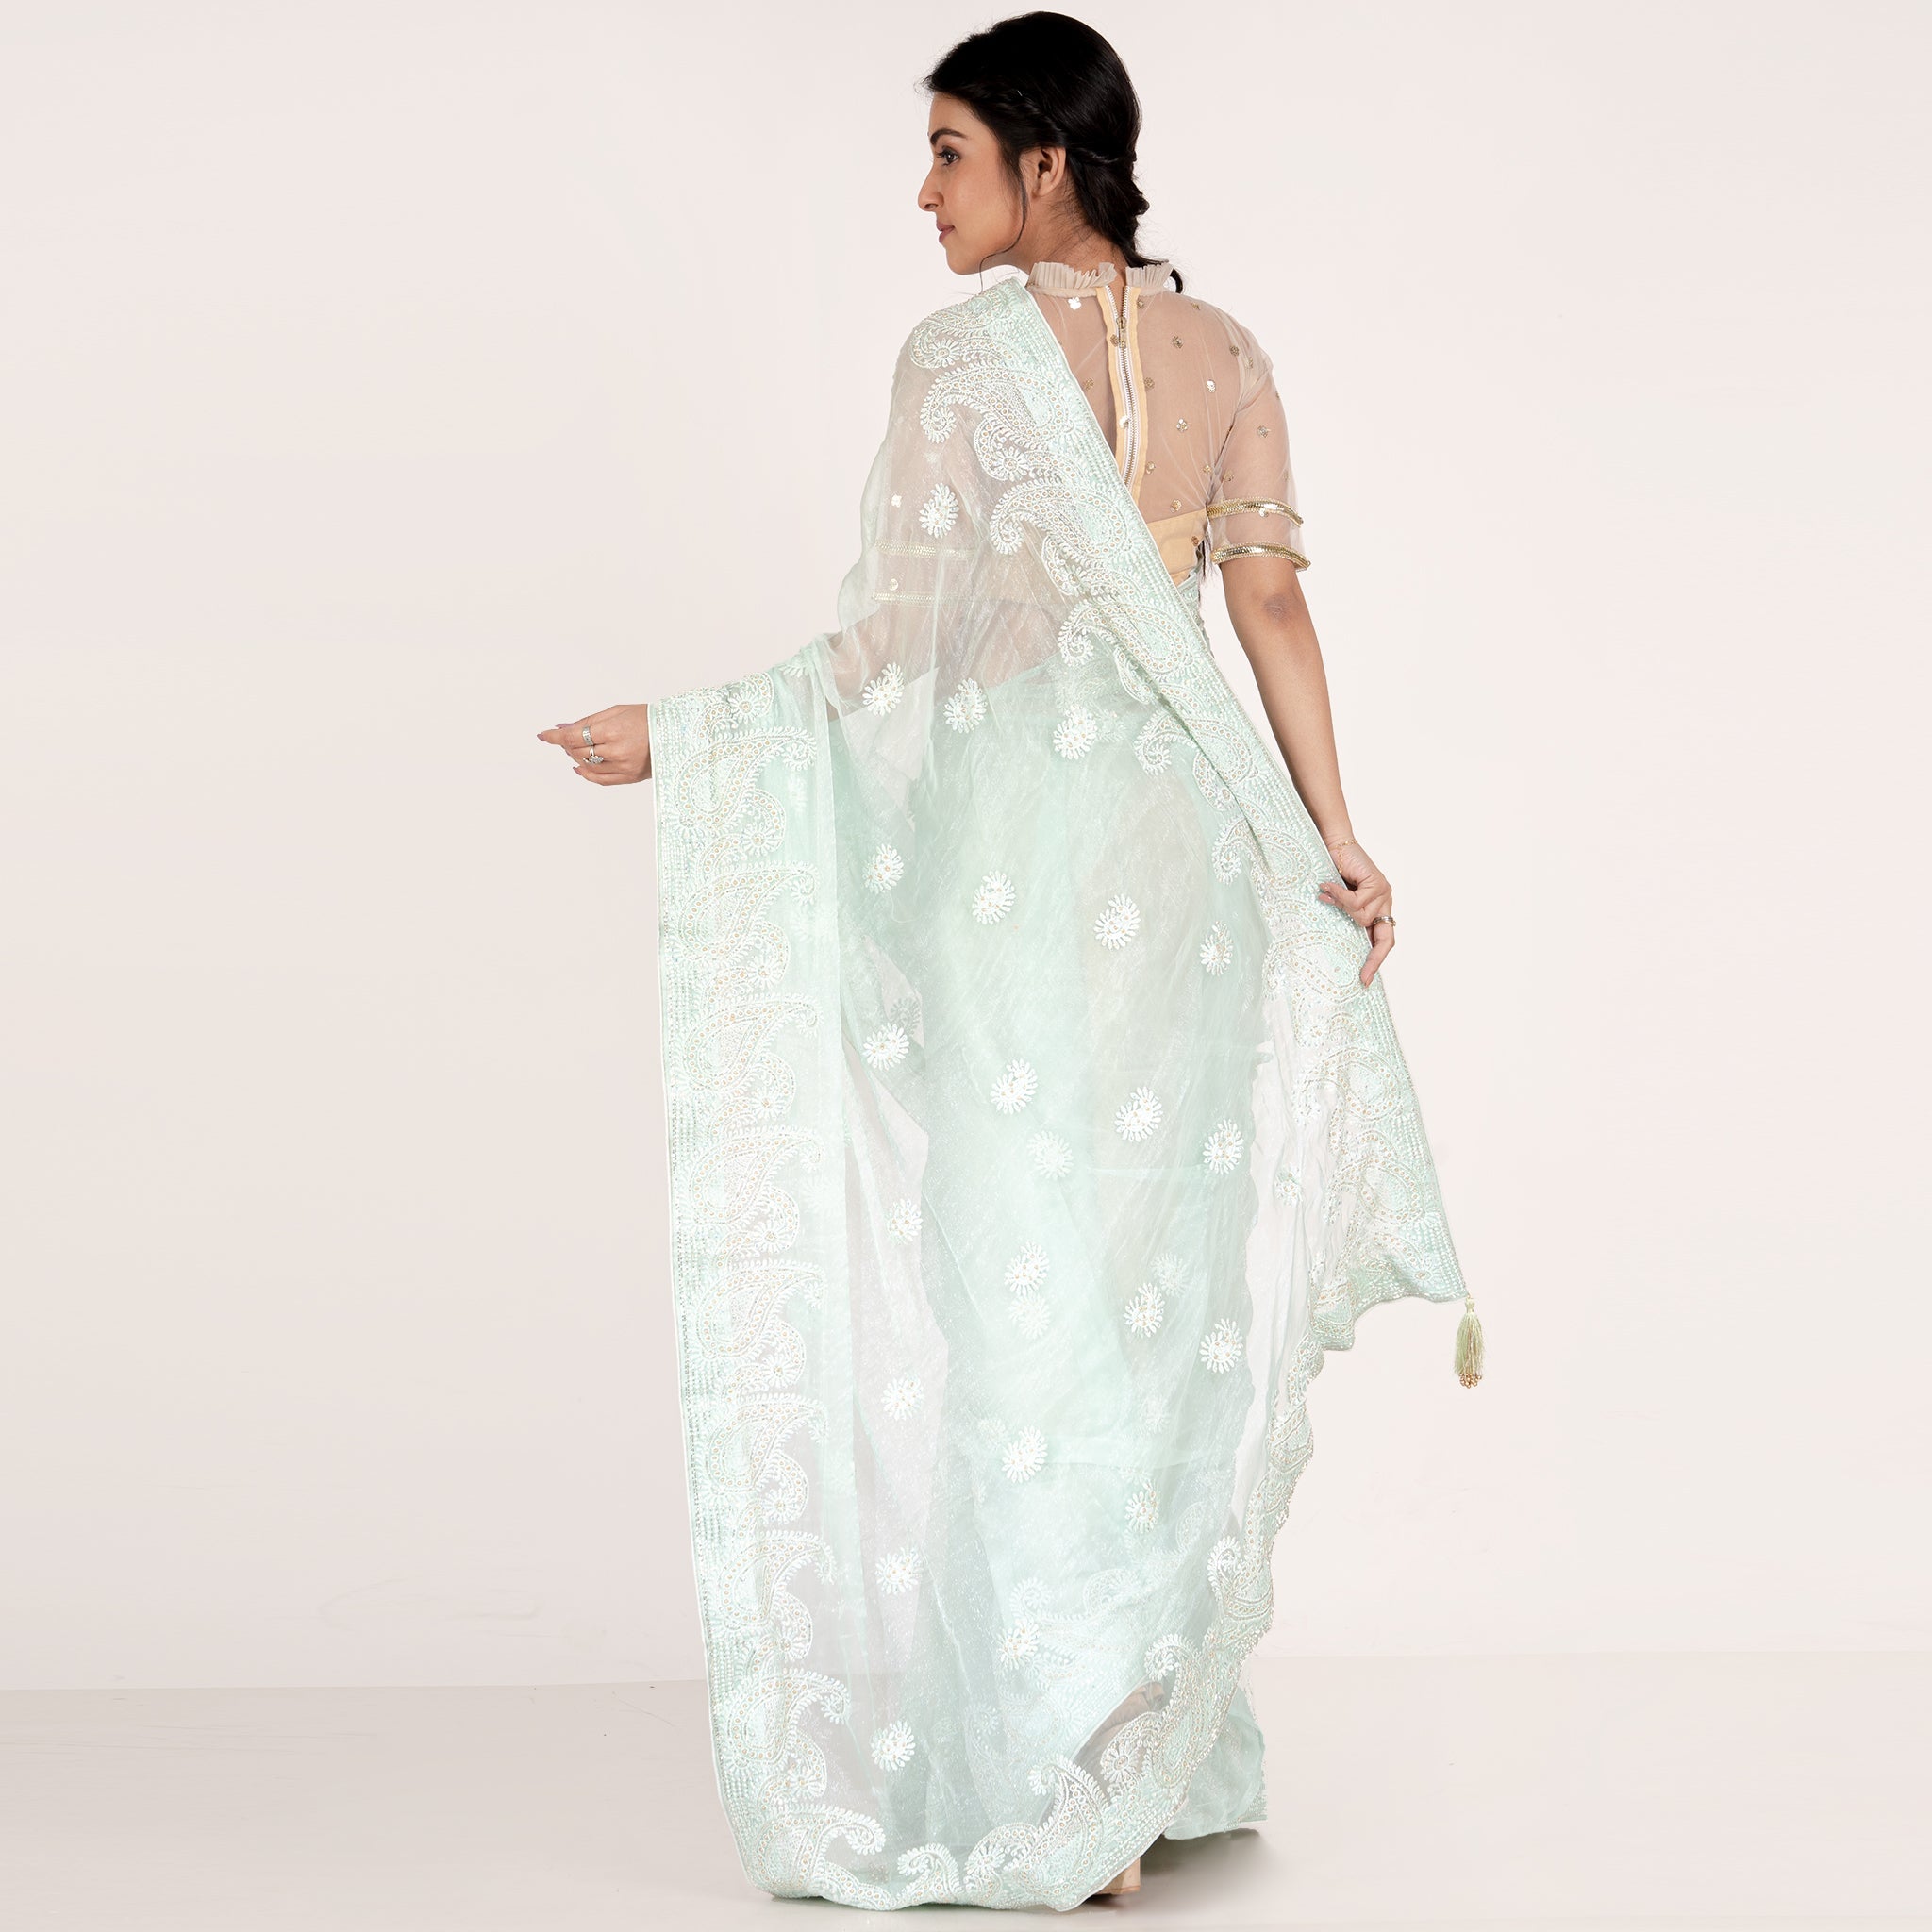 Women's Aqua Blue Pure Chiffon Fully Embroidered Saree With Crystallization - Boveee